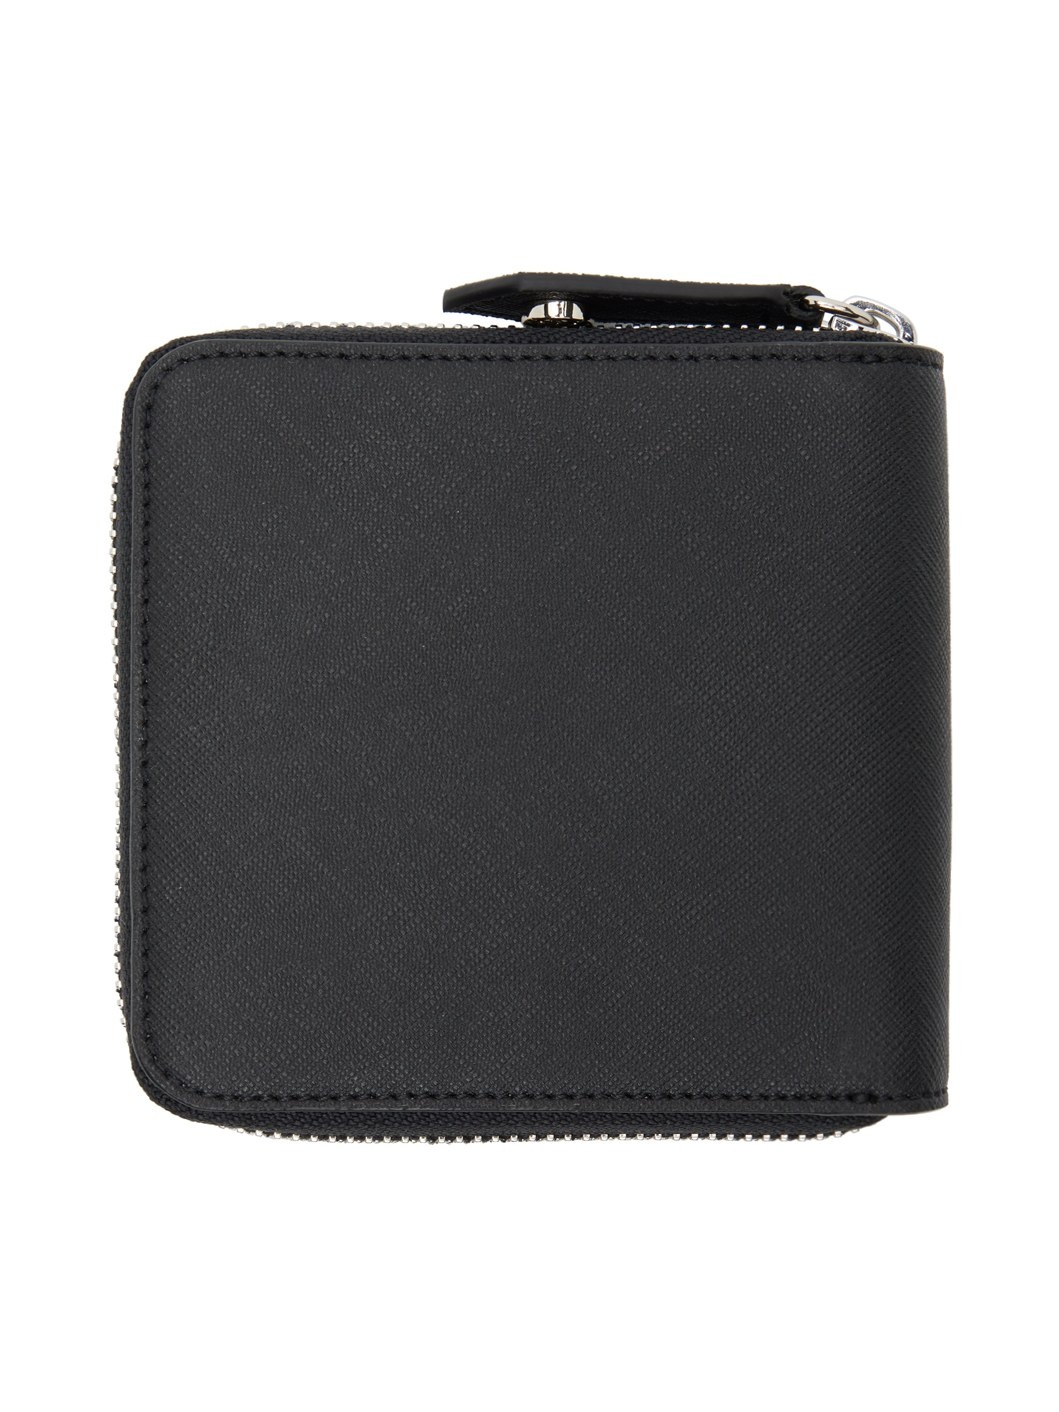 Black Saffiano Biogreen Rounded Square Wallet - 2